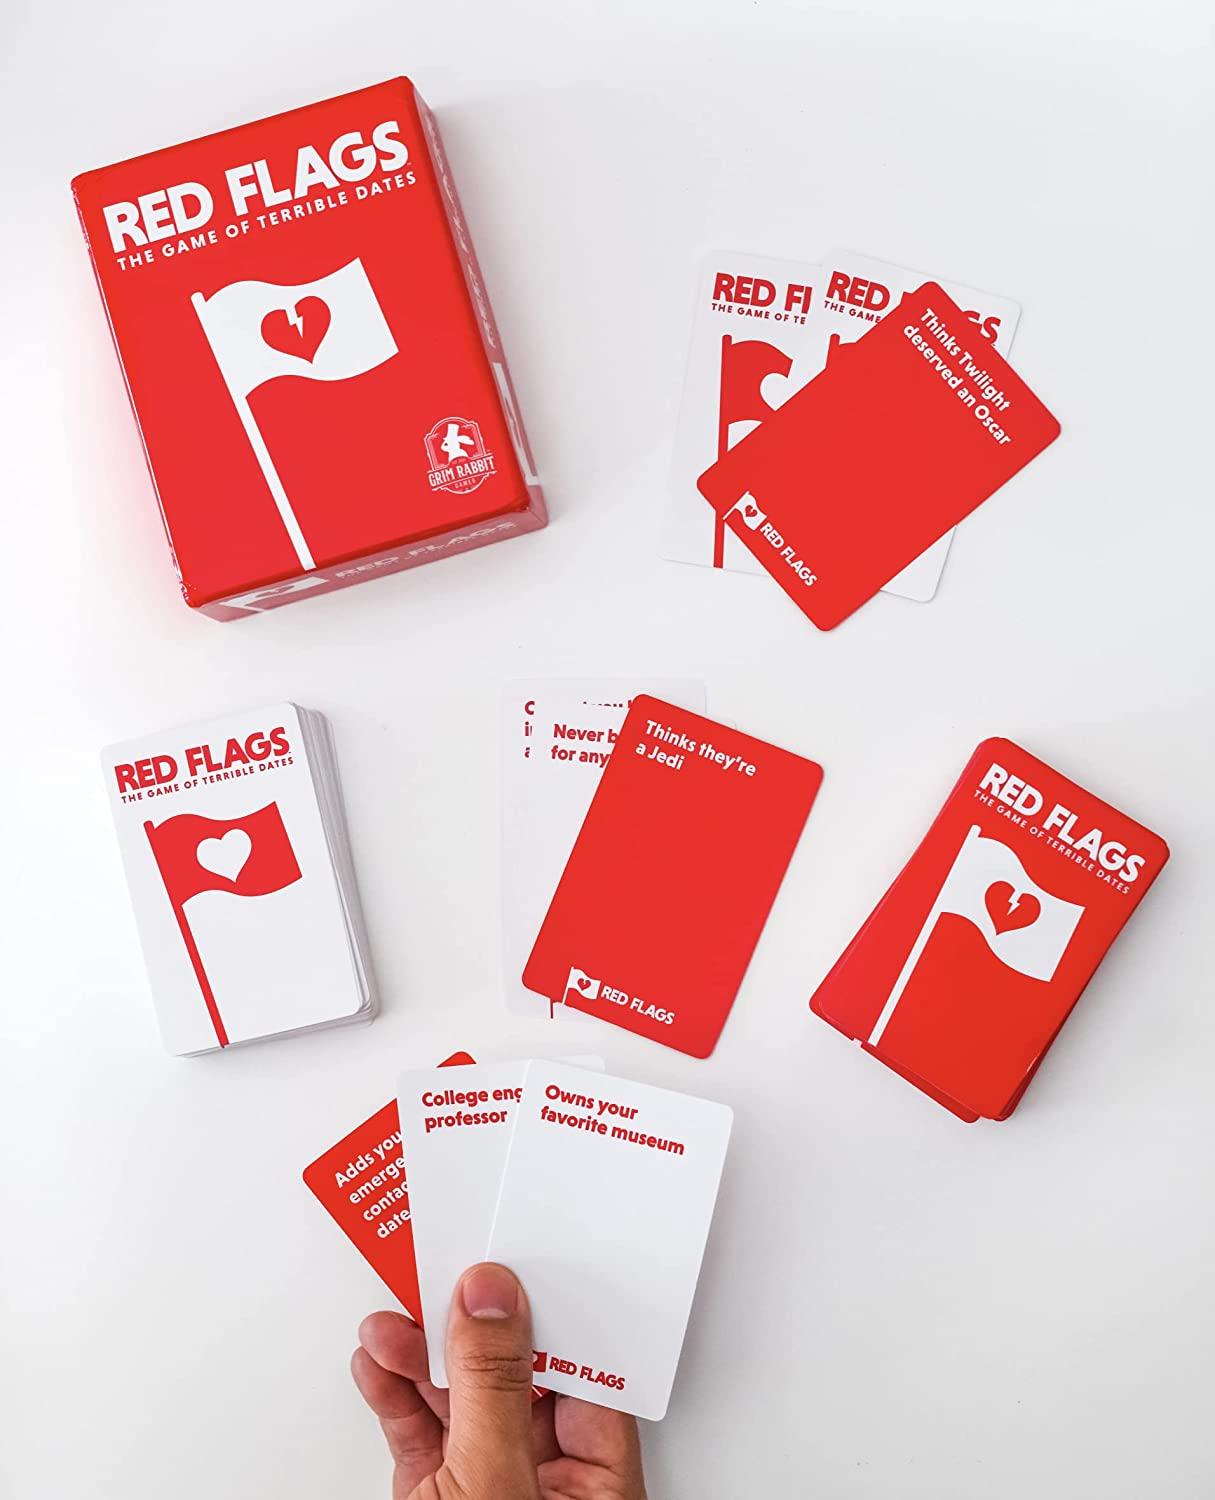 Red Flags : The game of terrible dates (Ang) - La Ribouldingue